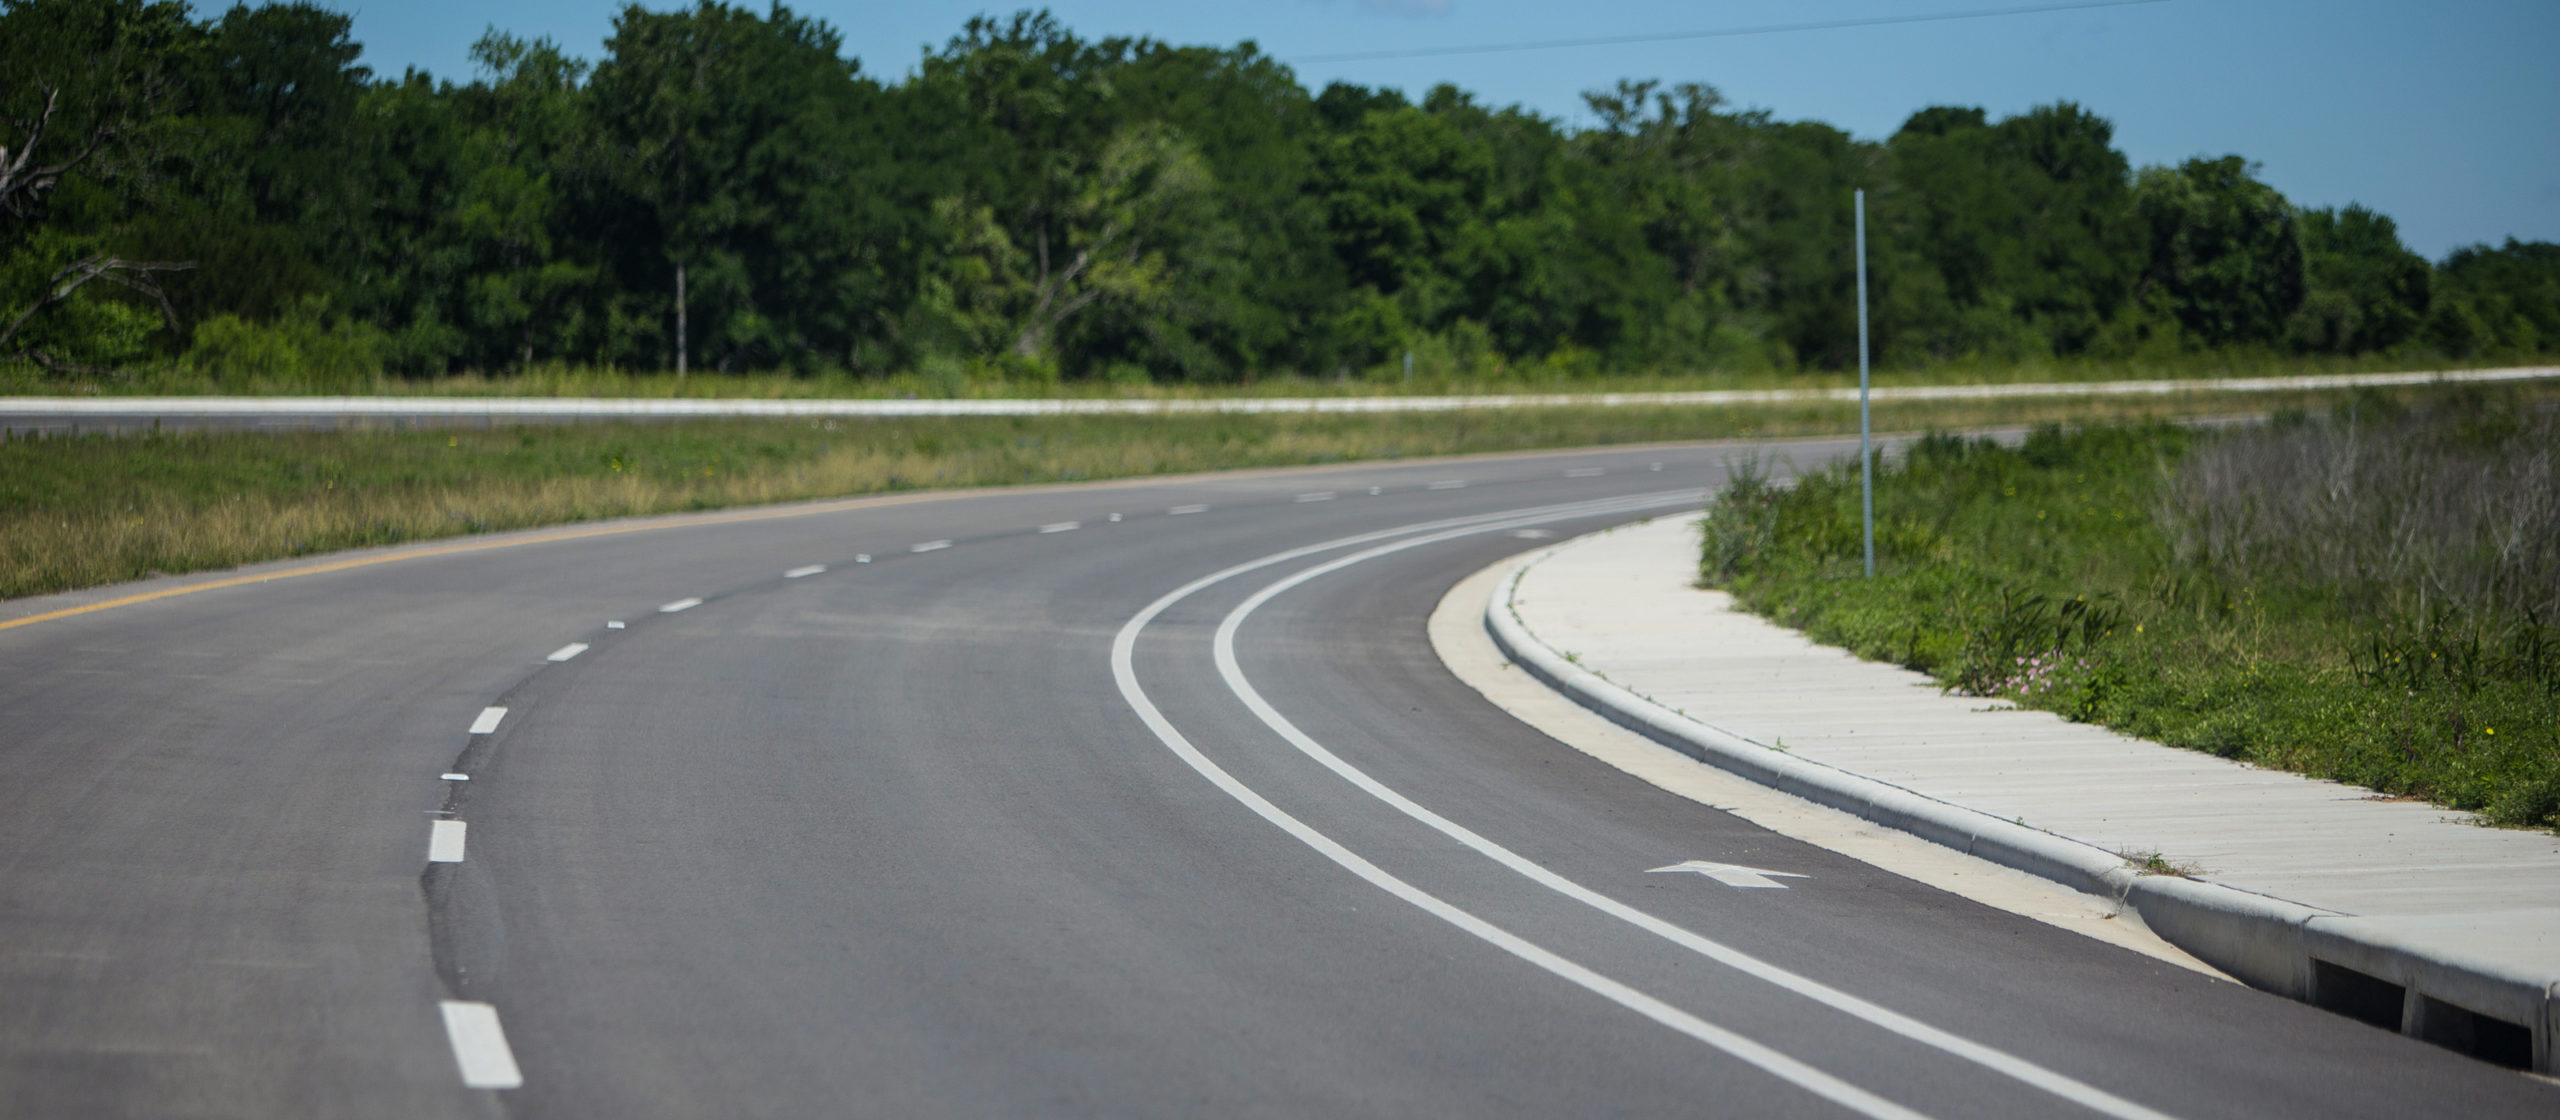 View of curve on road with striping